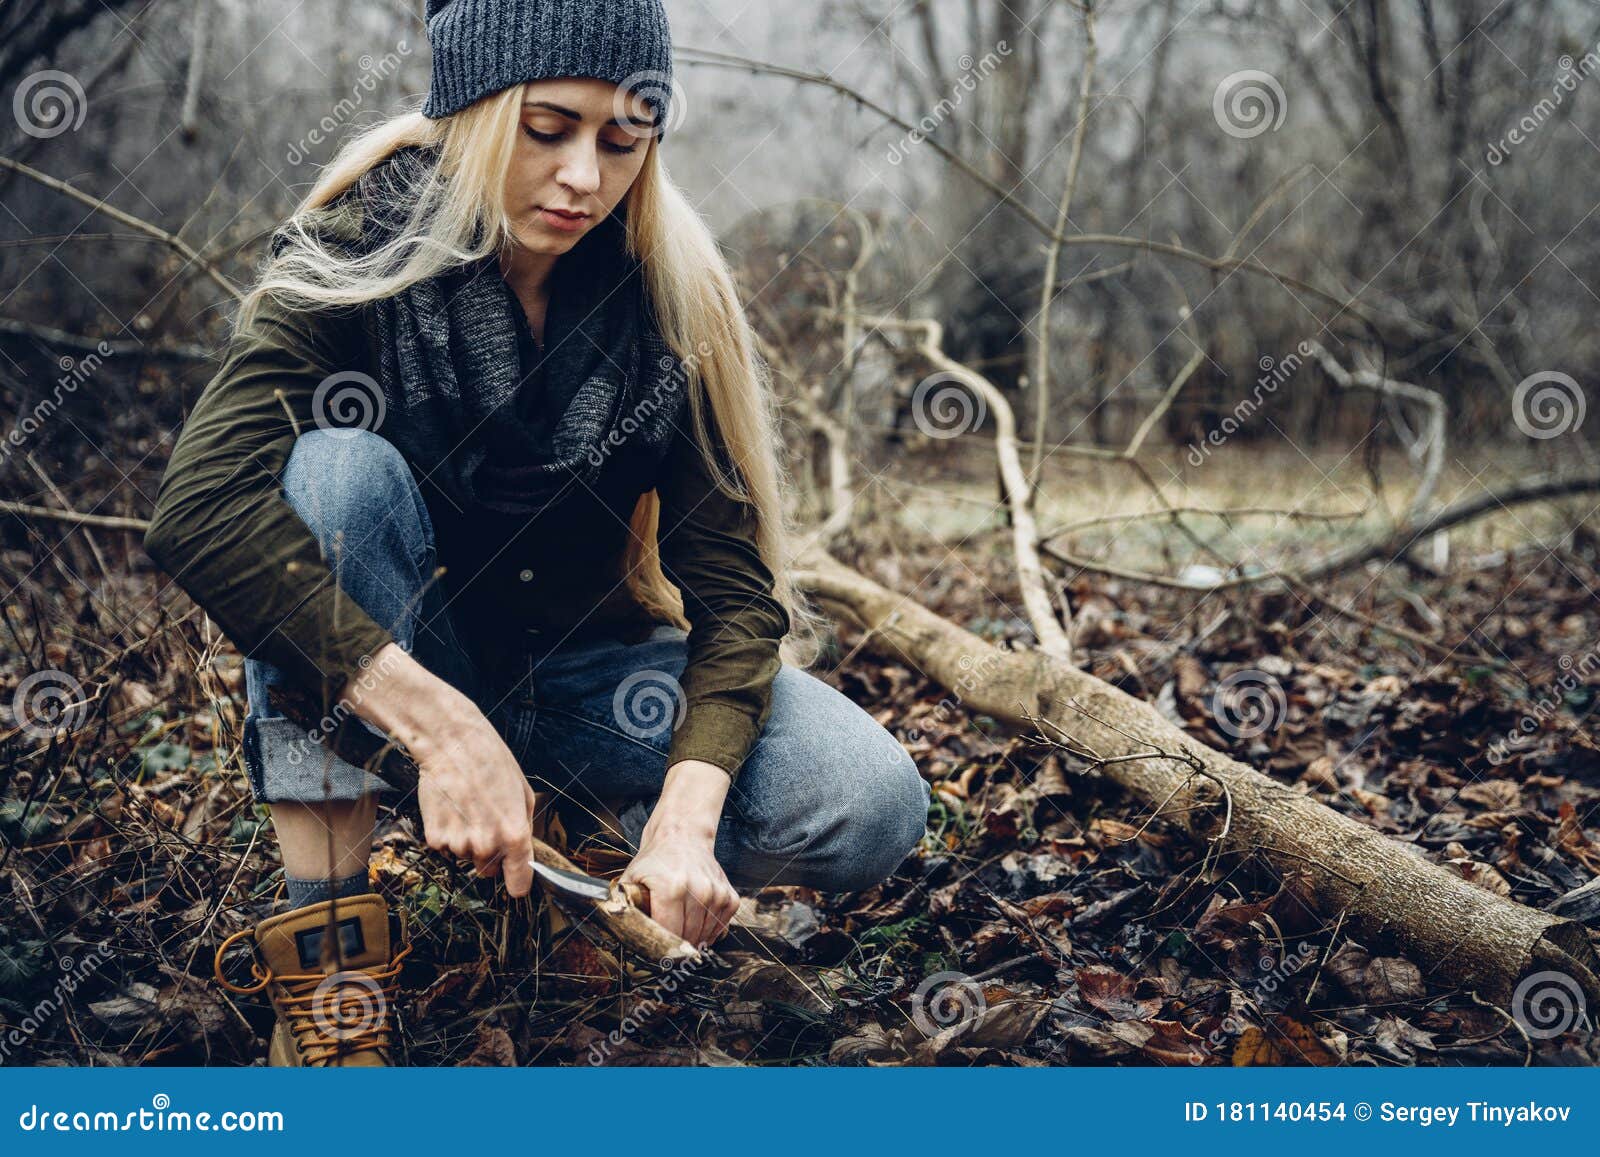 https://thumbs.dreamstime.com/z/woman-tourist-cuts-wooden-stick-knife-forest-bushcraft-survival-scouting-concept-woman-tourist-cuts-wooden-stick-181140454.jpg